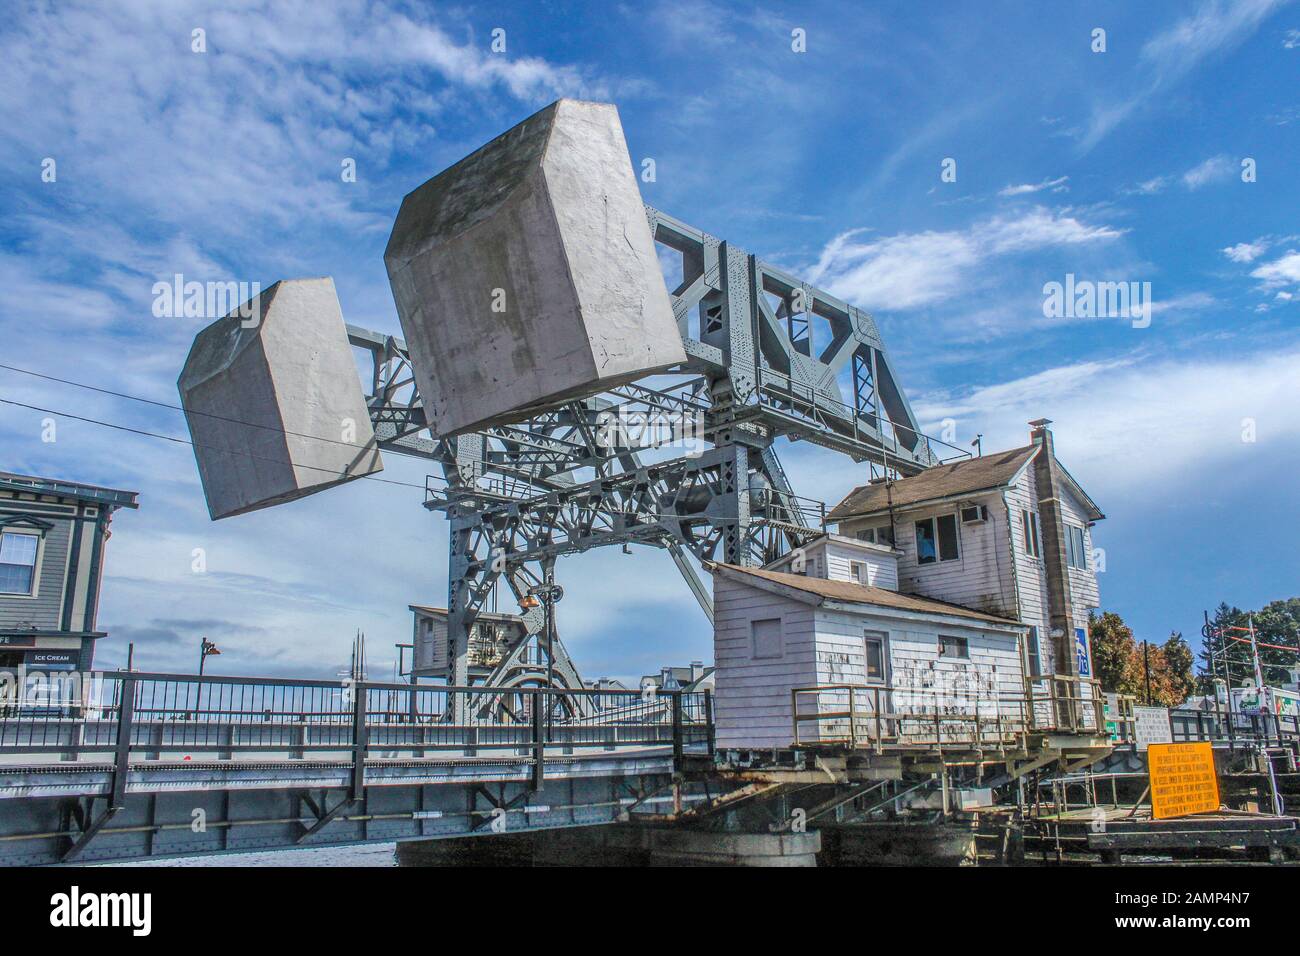 Mystic USA 2011-08-08 015 Iconic Mystic River Bascule Drawbridge with all its mechanical parts are exposed against a beautiful blue sky with clouds Stock Photo